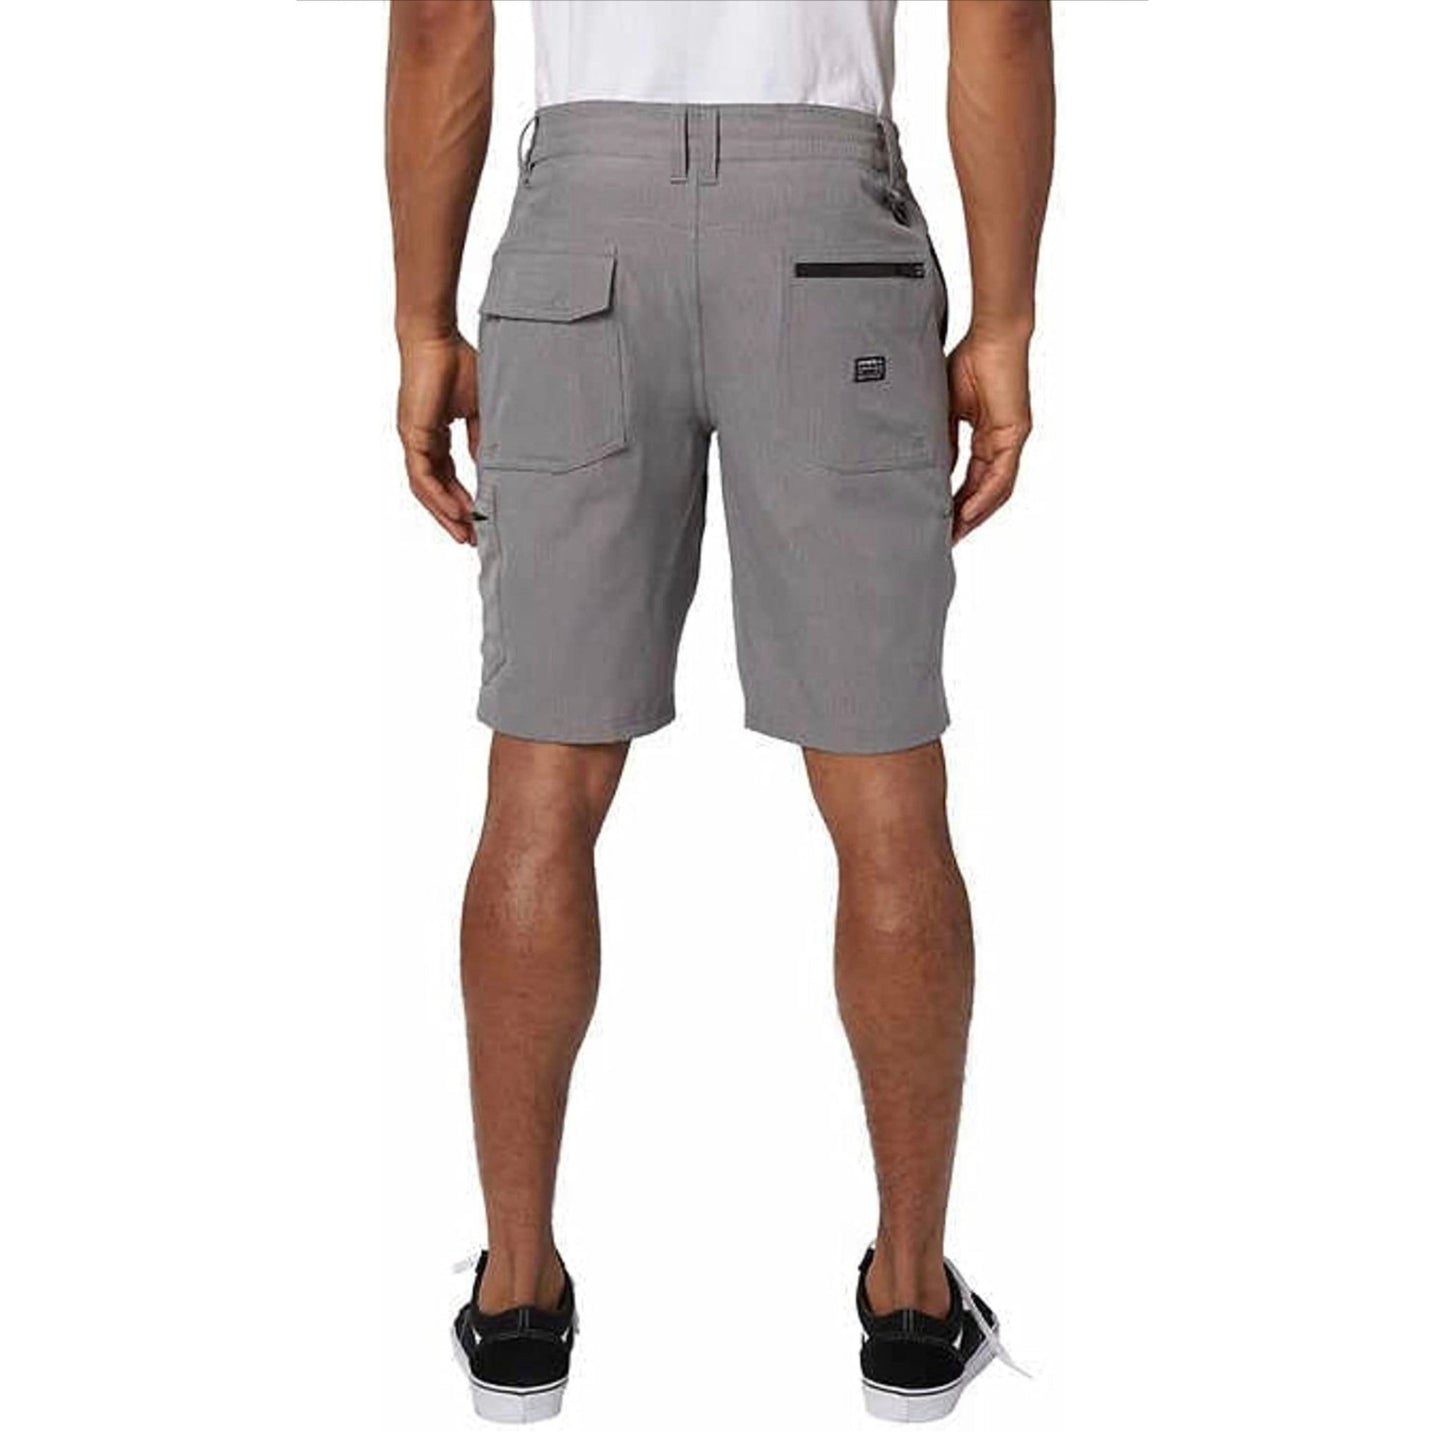 O'Neill Men's Hybrid Cargo Short, 20 Inch Outseam, Charcoal Gray / Curl